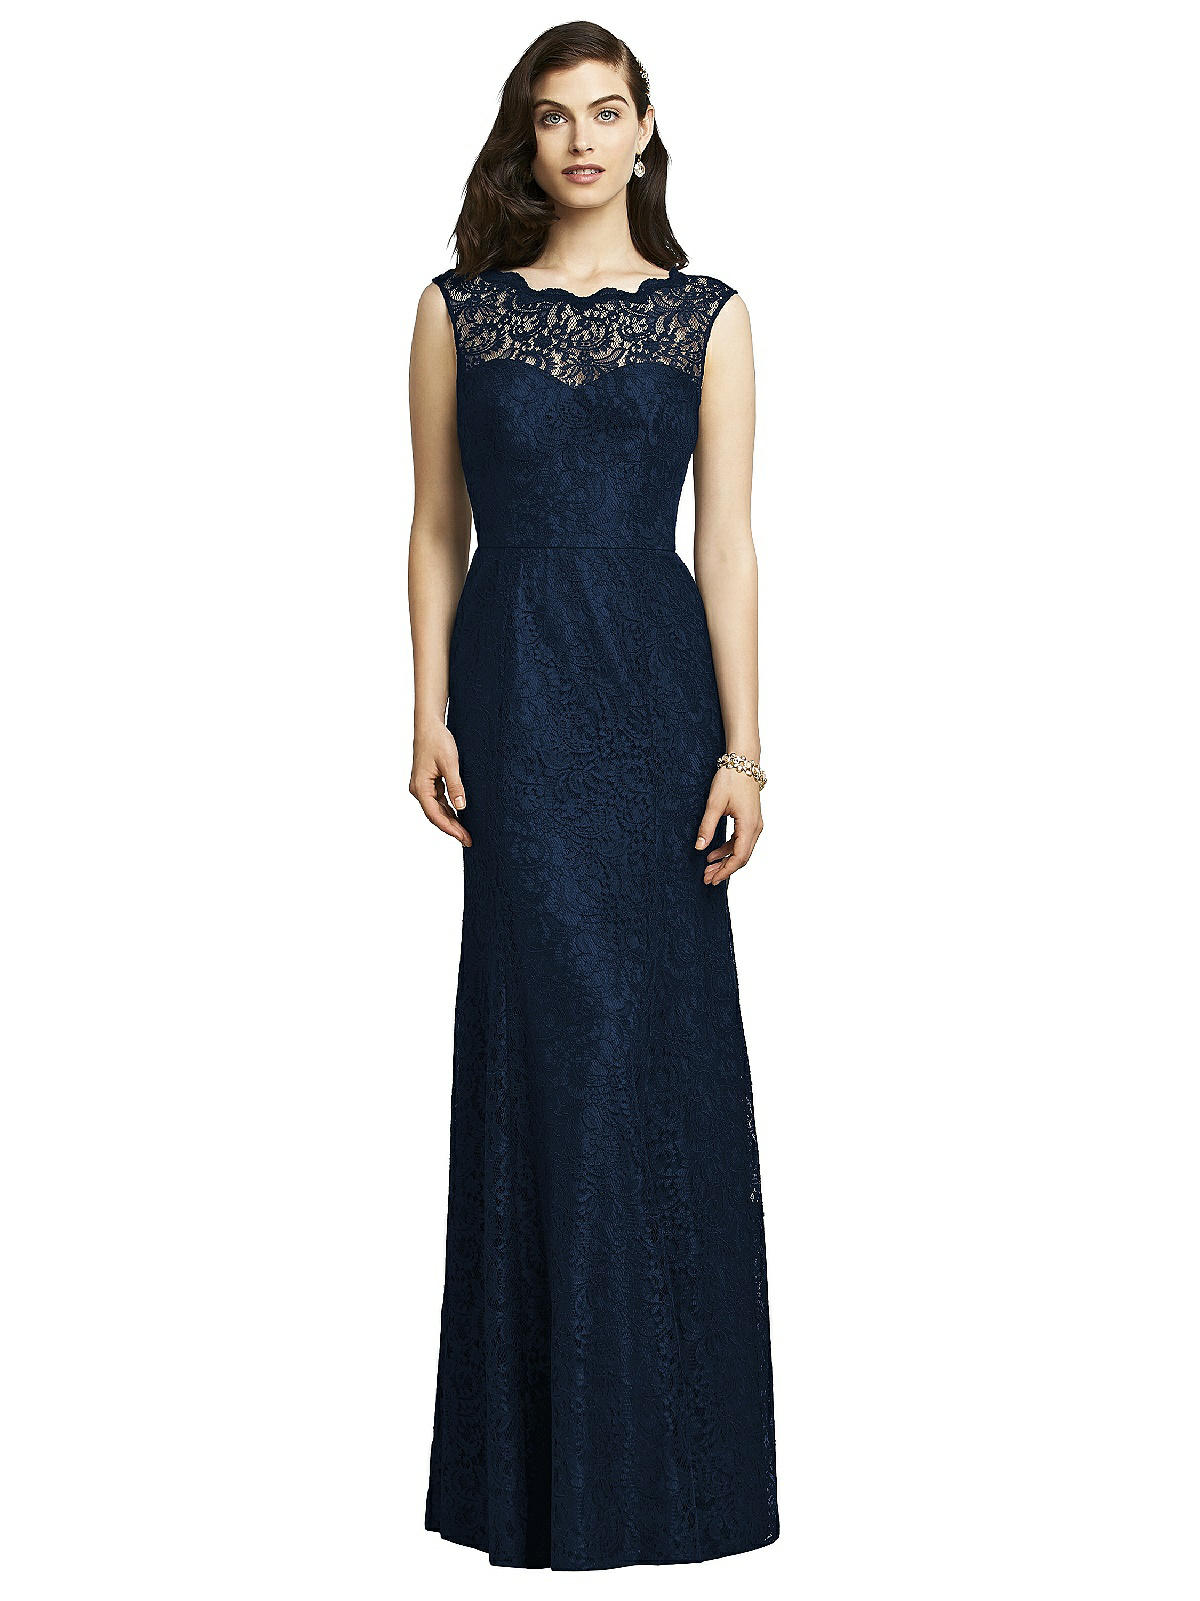 Dessy Collection Bridesmaid Dress 2940 | The Dessy Group